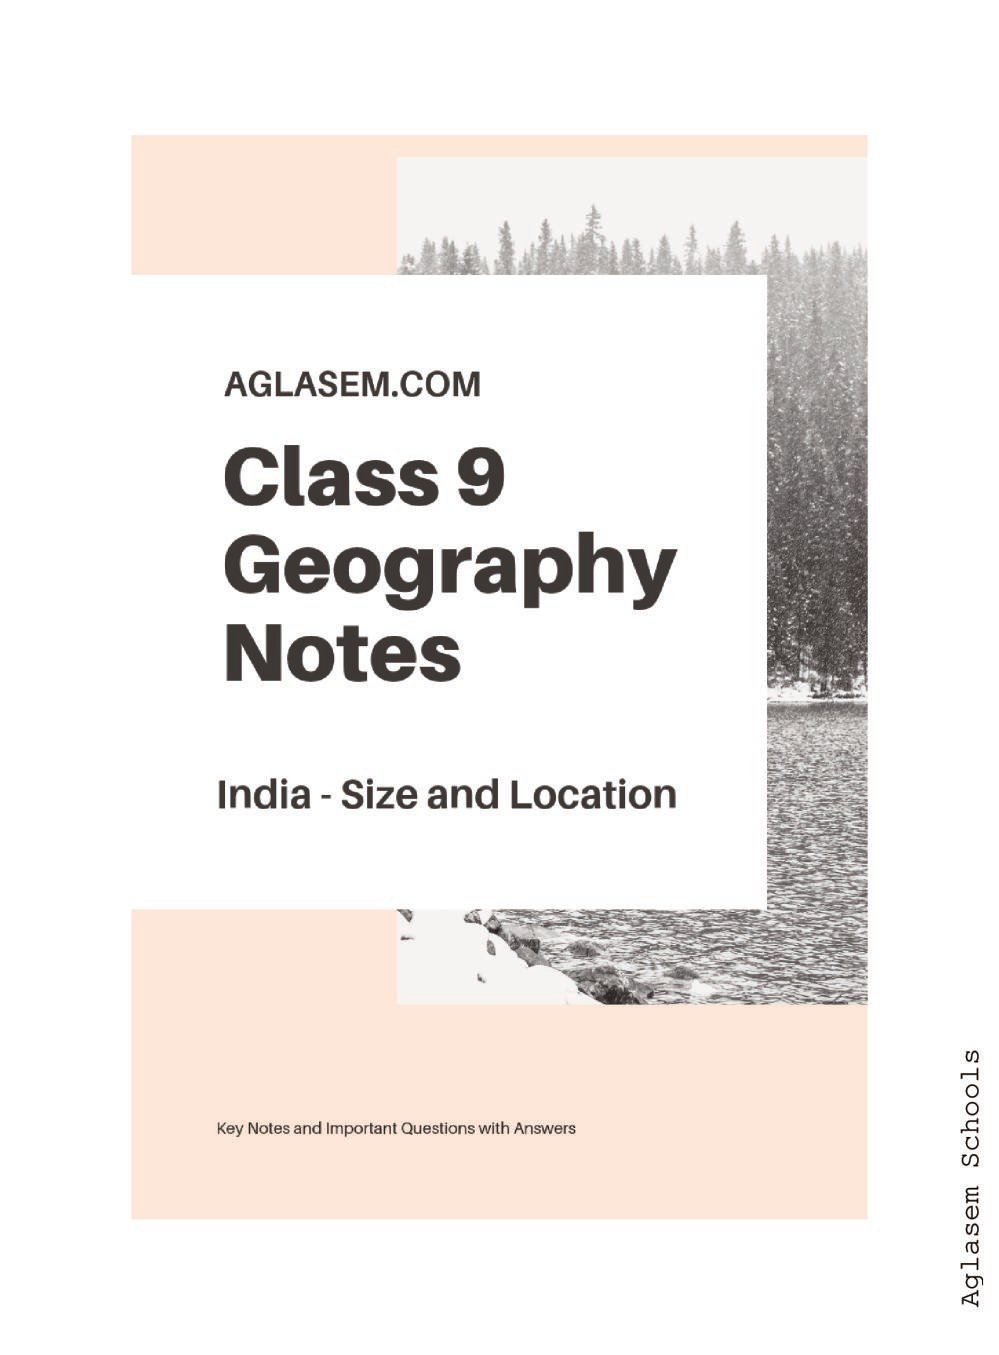 Class 9 Social Science Geography Notes for India - Size and Location - Page 1